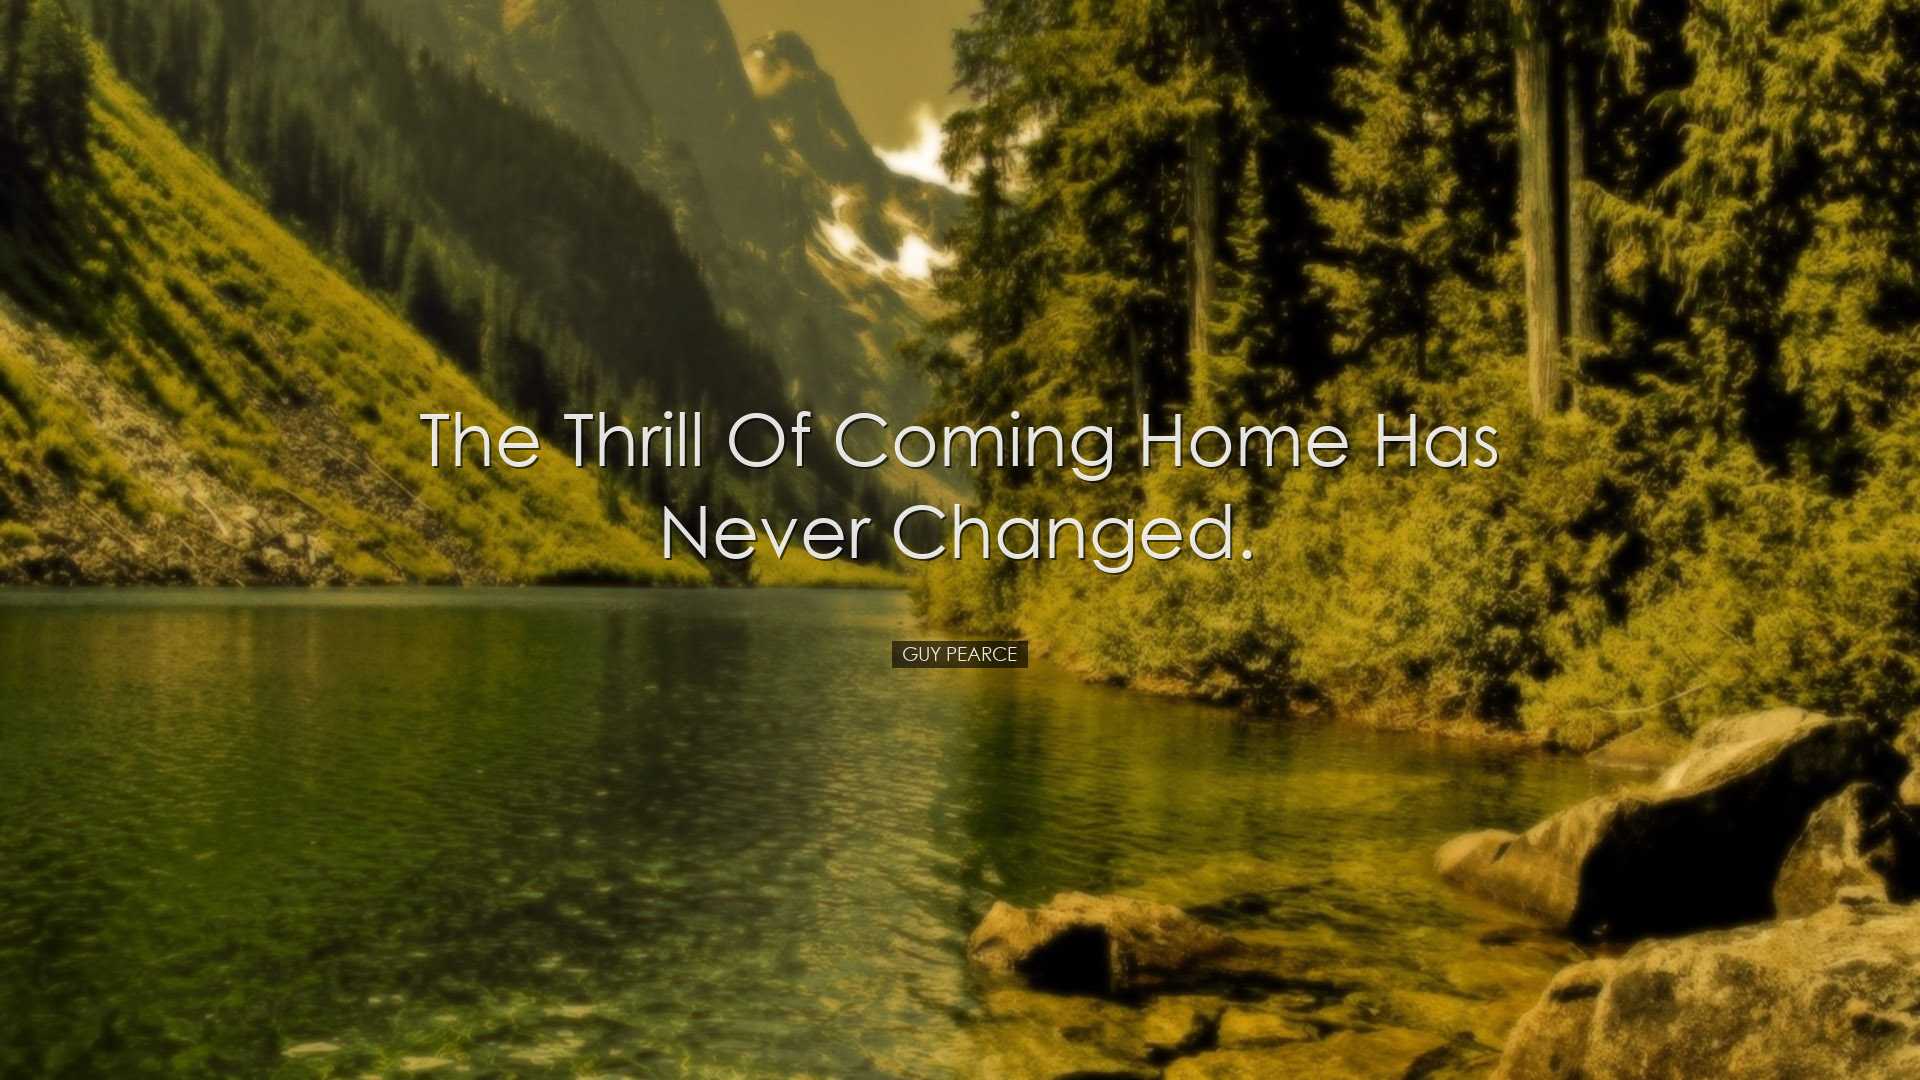 The thrill of coming home has never changed. - Guy Pearce